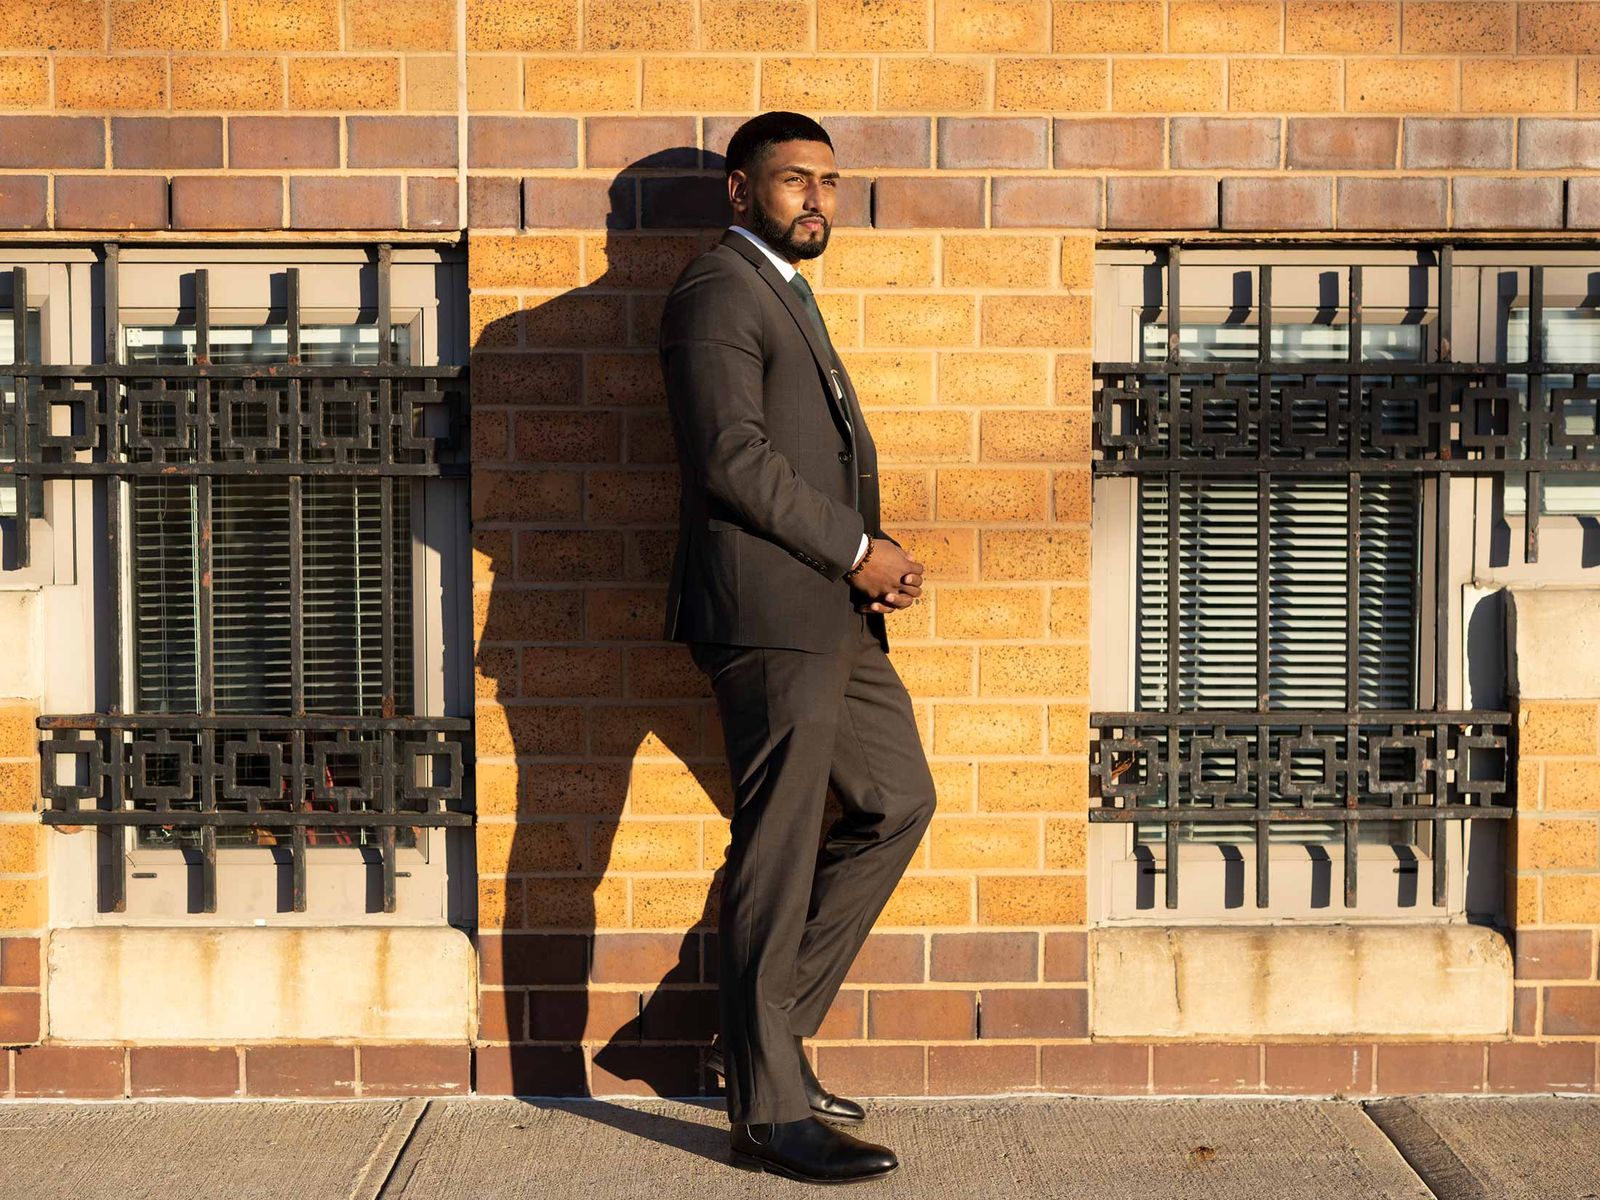 Kris Sidial, wearing a suit, stands against building on a New York City sidewalk.